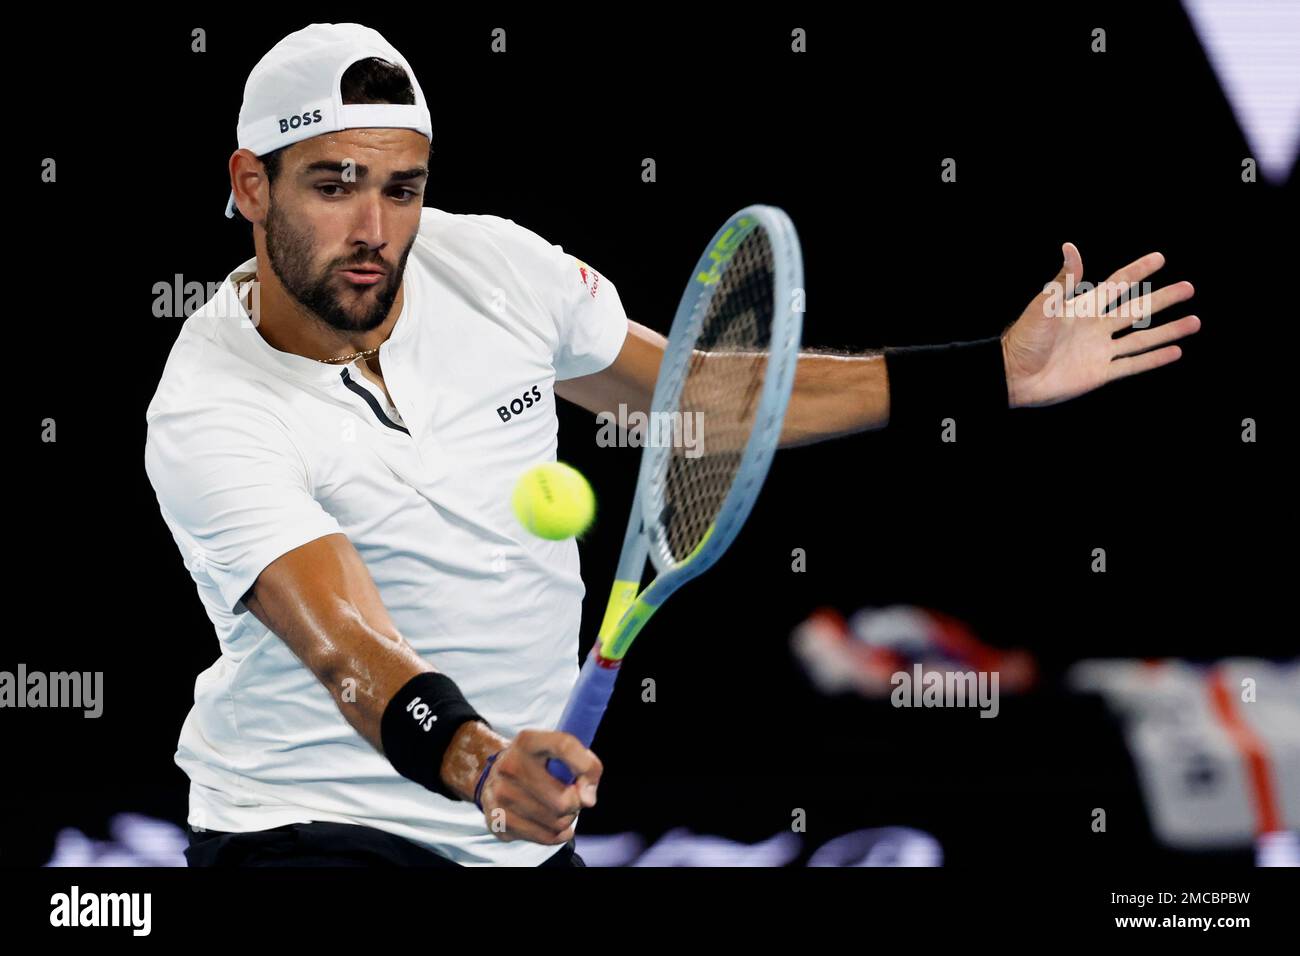 Matteo Berrettini of Italy plays a backhand return to Rafael Nadal of Spain during their semifinal match at the Australian Open tennis championships in Melbourne, Australia, Friday, Jan